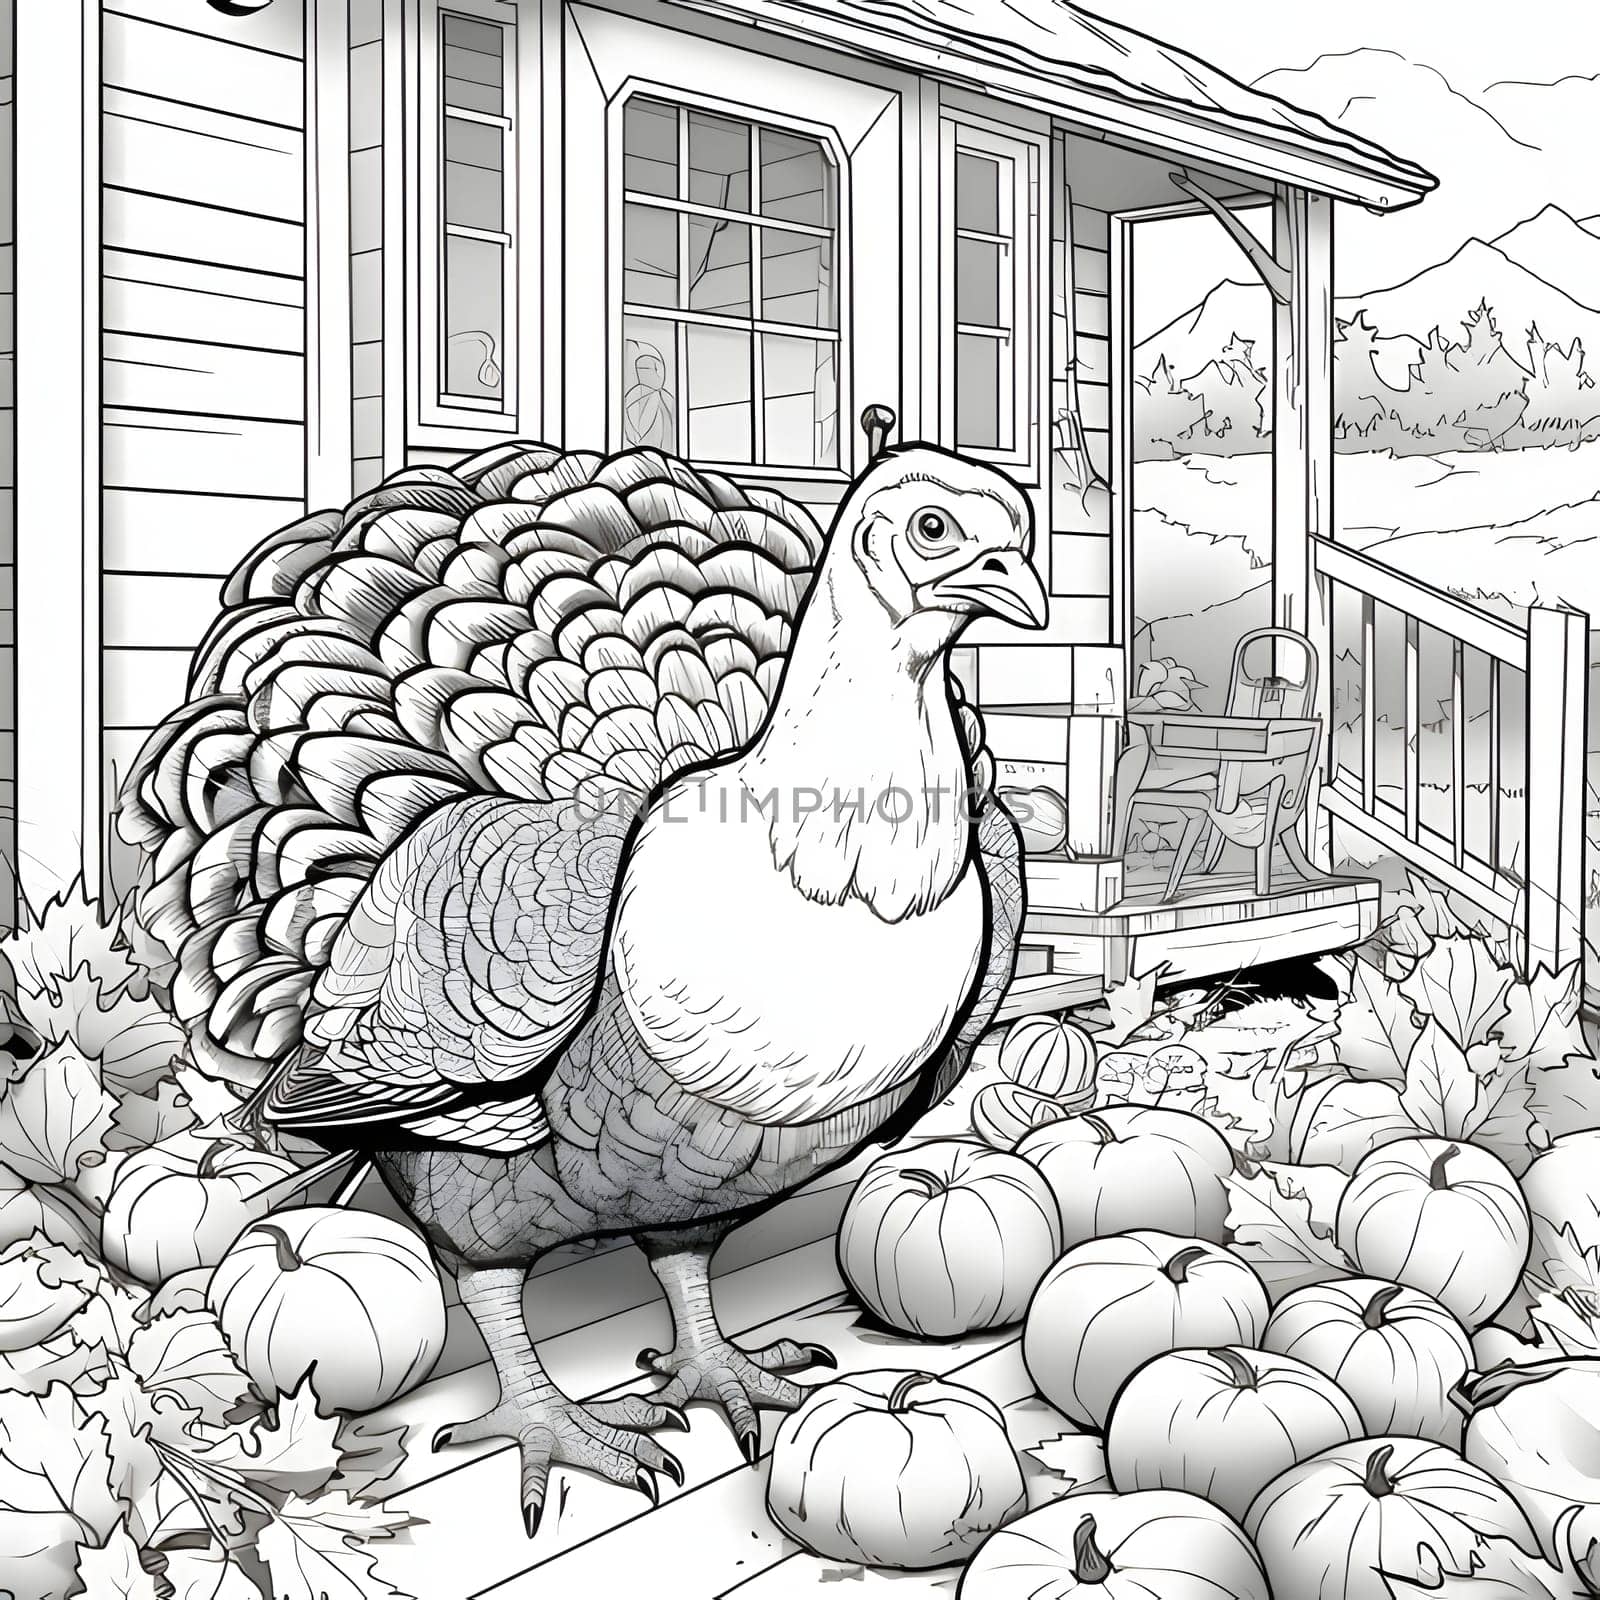 Turkey in front of the entrance to the wooden house around the pumpkins and leaves. Black and White coloring book. Turkey as the main dish of thanksgiving for the harvest. An atmosphere of joy and celebration.